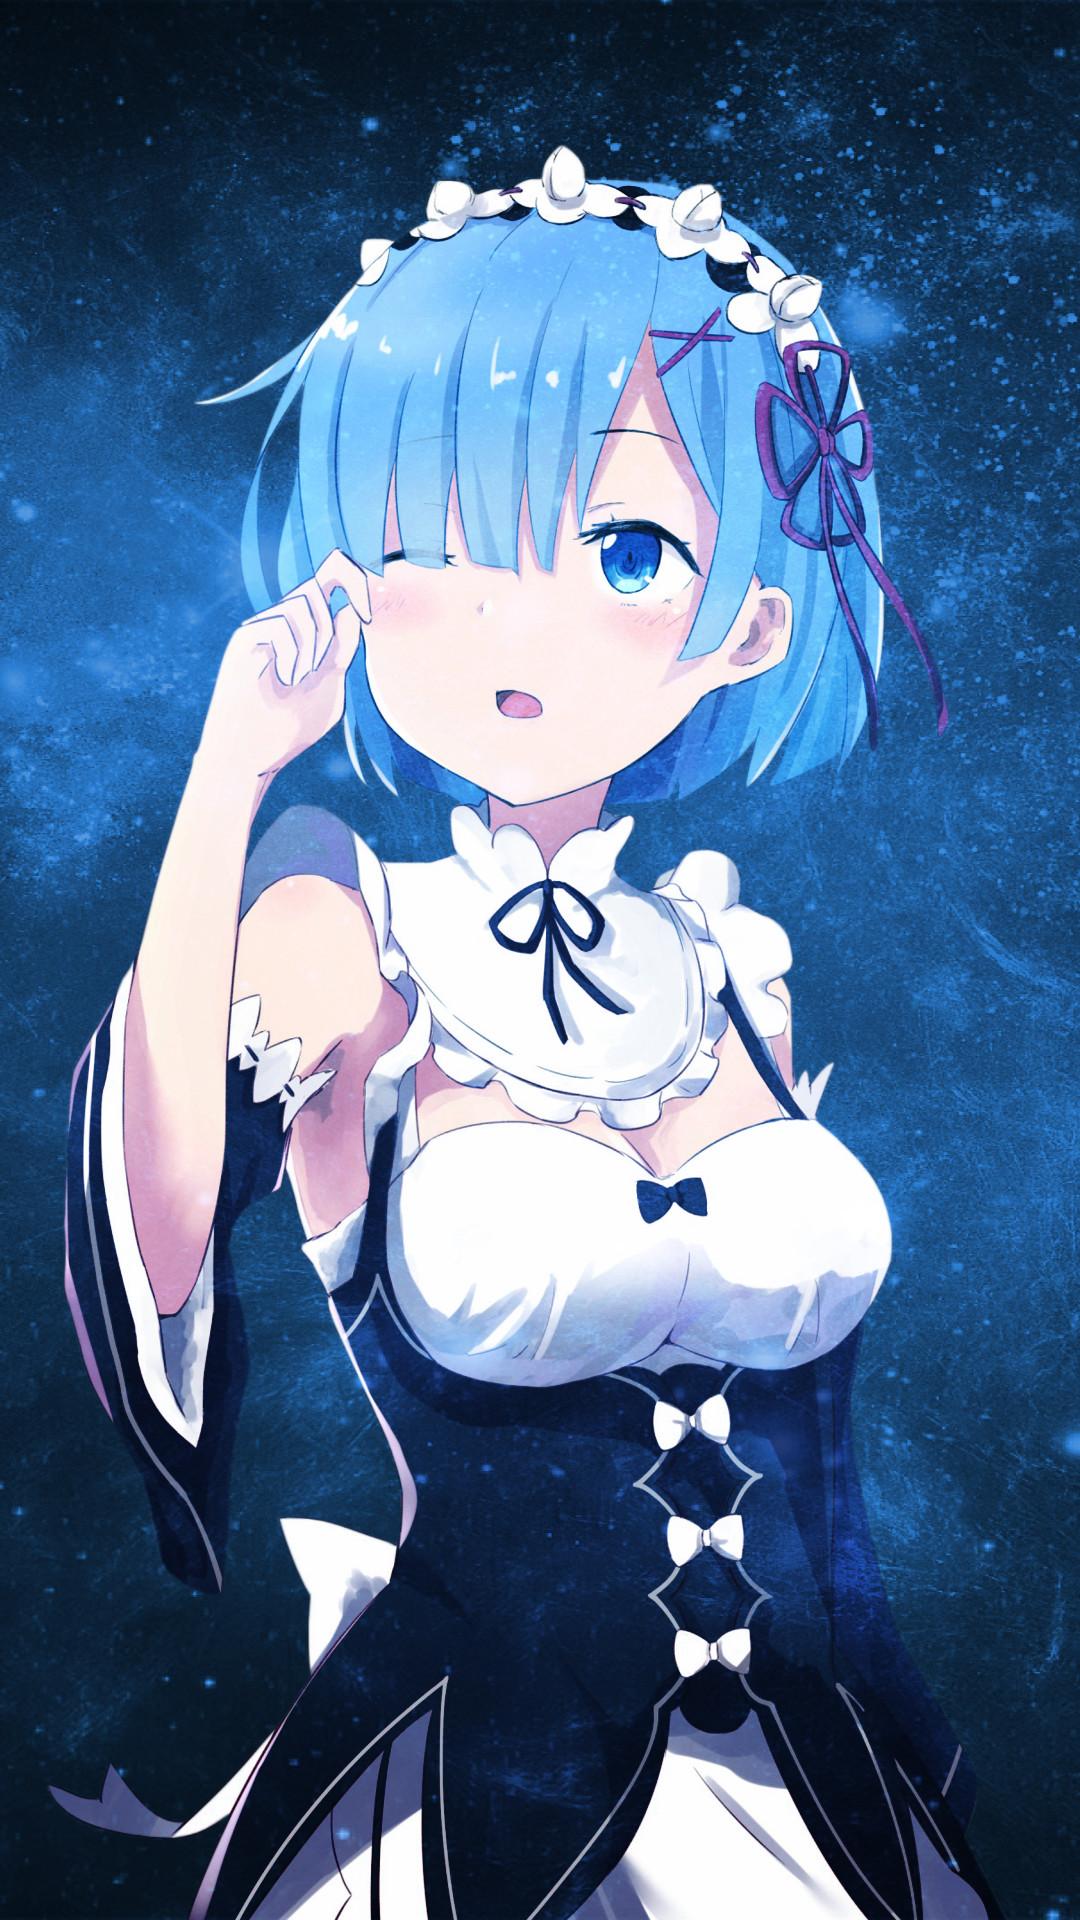 1080 x 1920 · jpeg - Anime Wallpaper for Phone (69+ images)